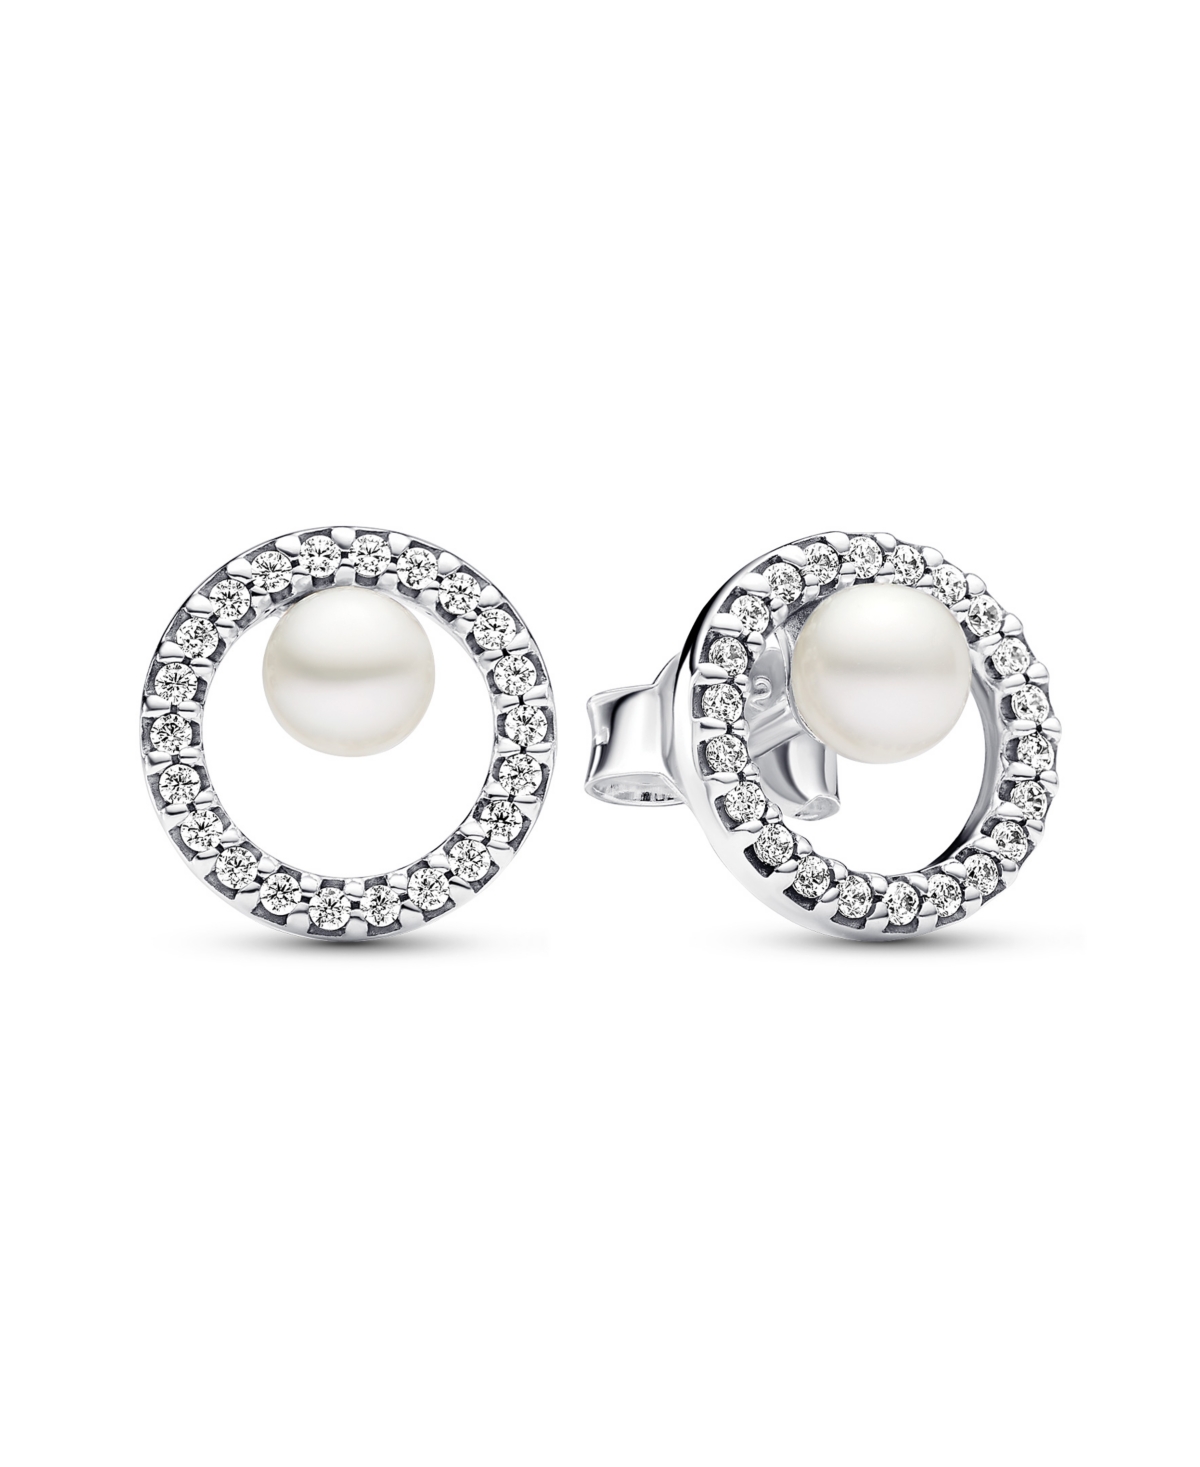 Treated Freshwater Cultured Pearl Pave Halo Stud Earrings - Silver